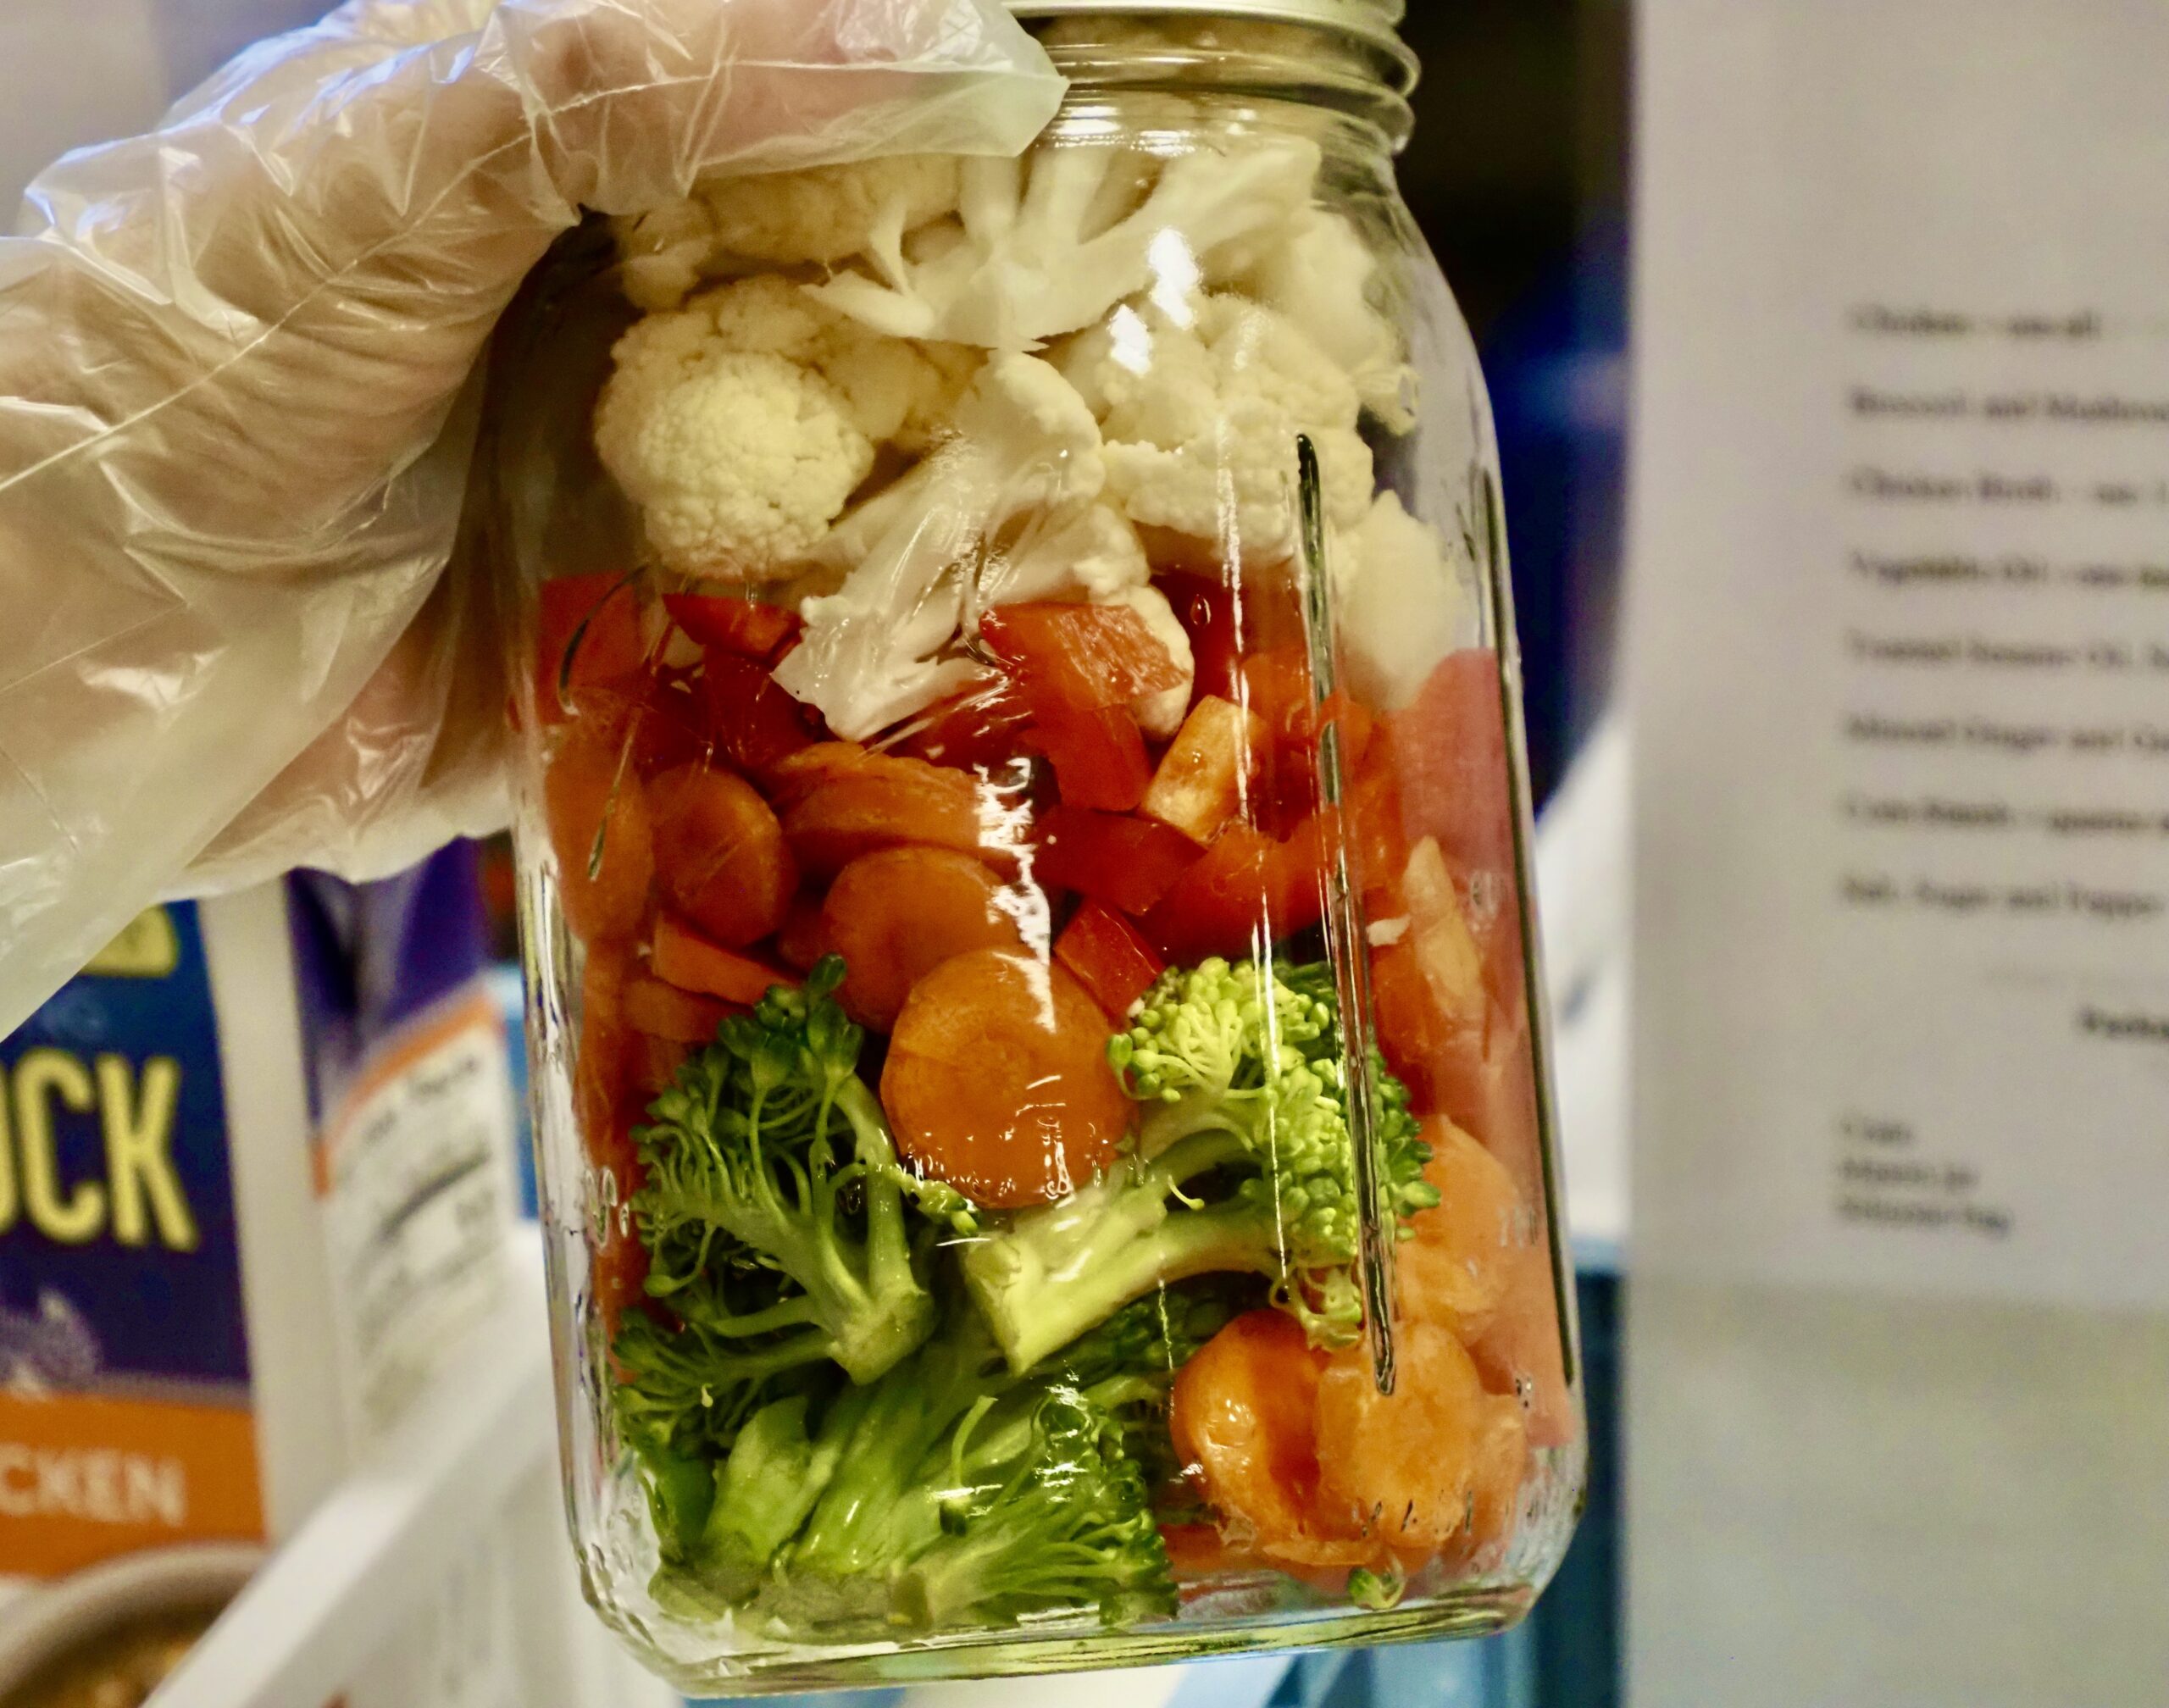 gloved hand holding a clear glass jar full of chopped broccoli, carrot and cauliflower.